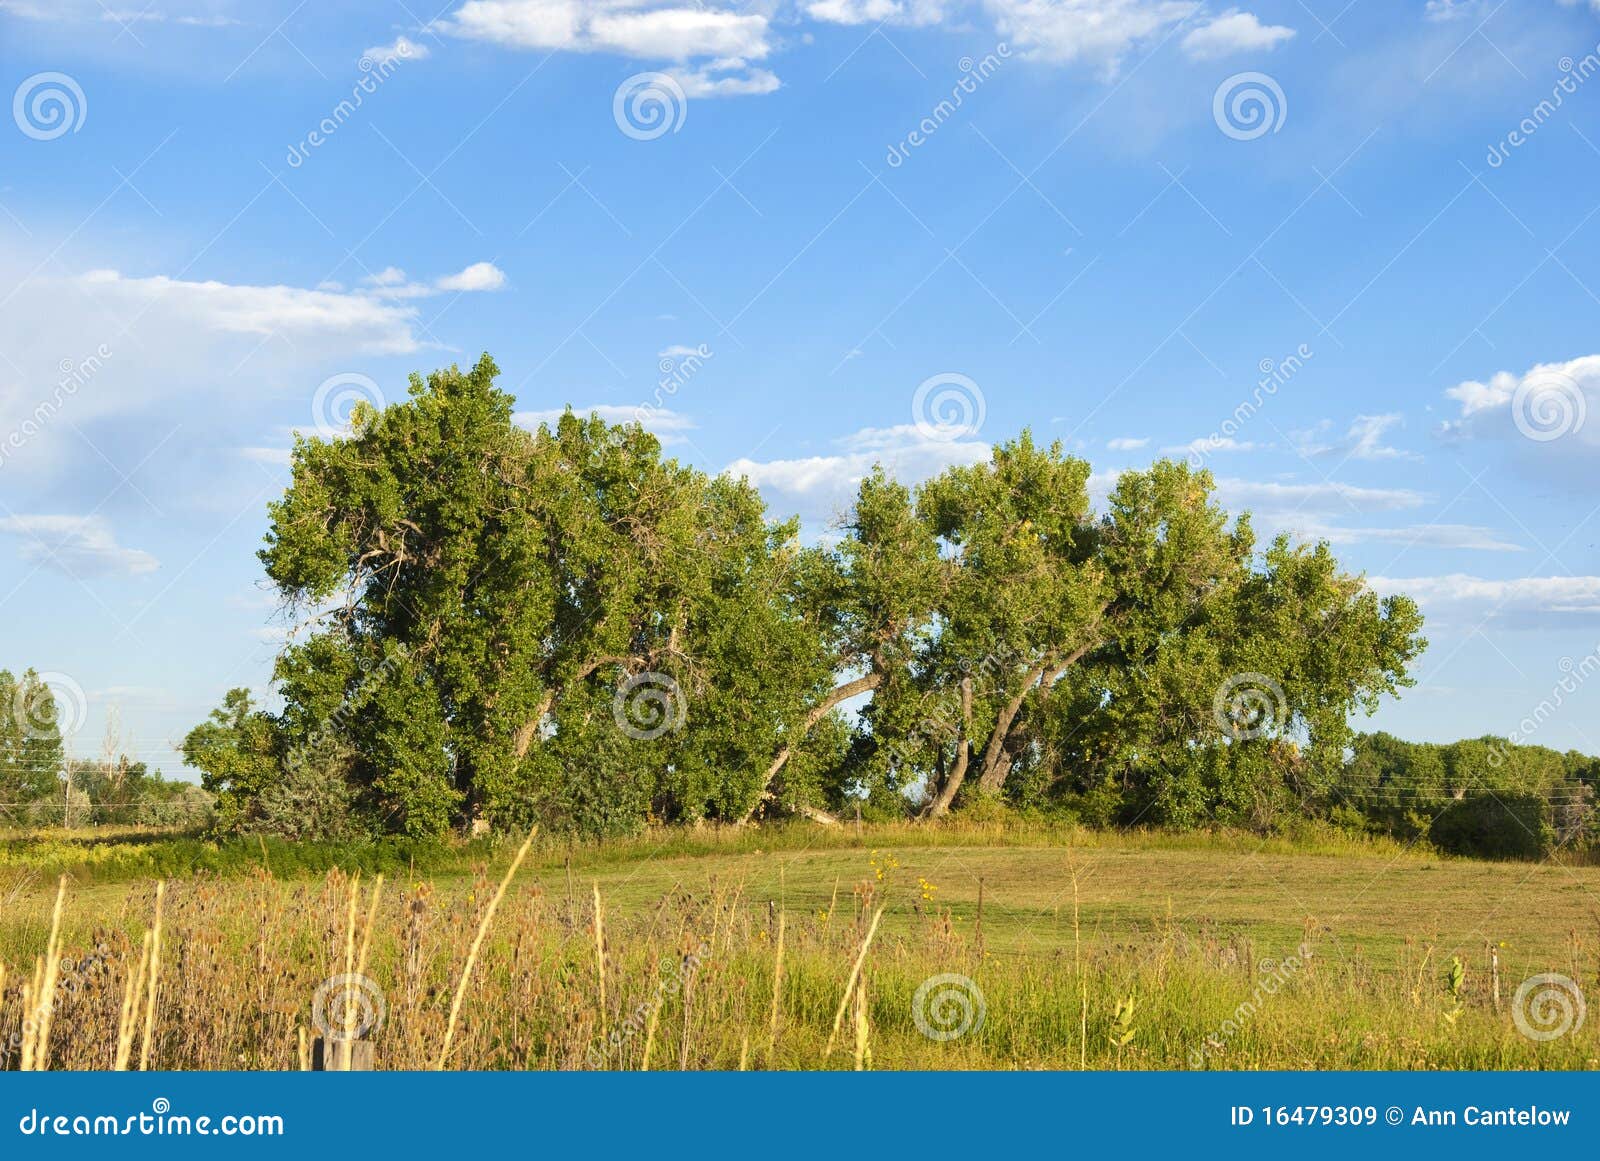 majestic cottonwood trees in late afternoon